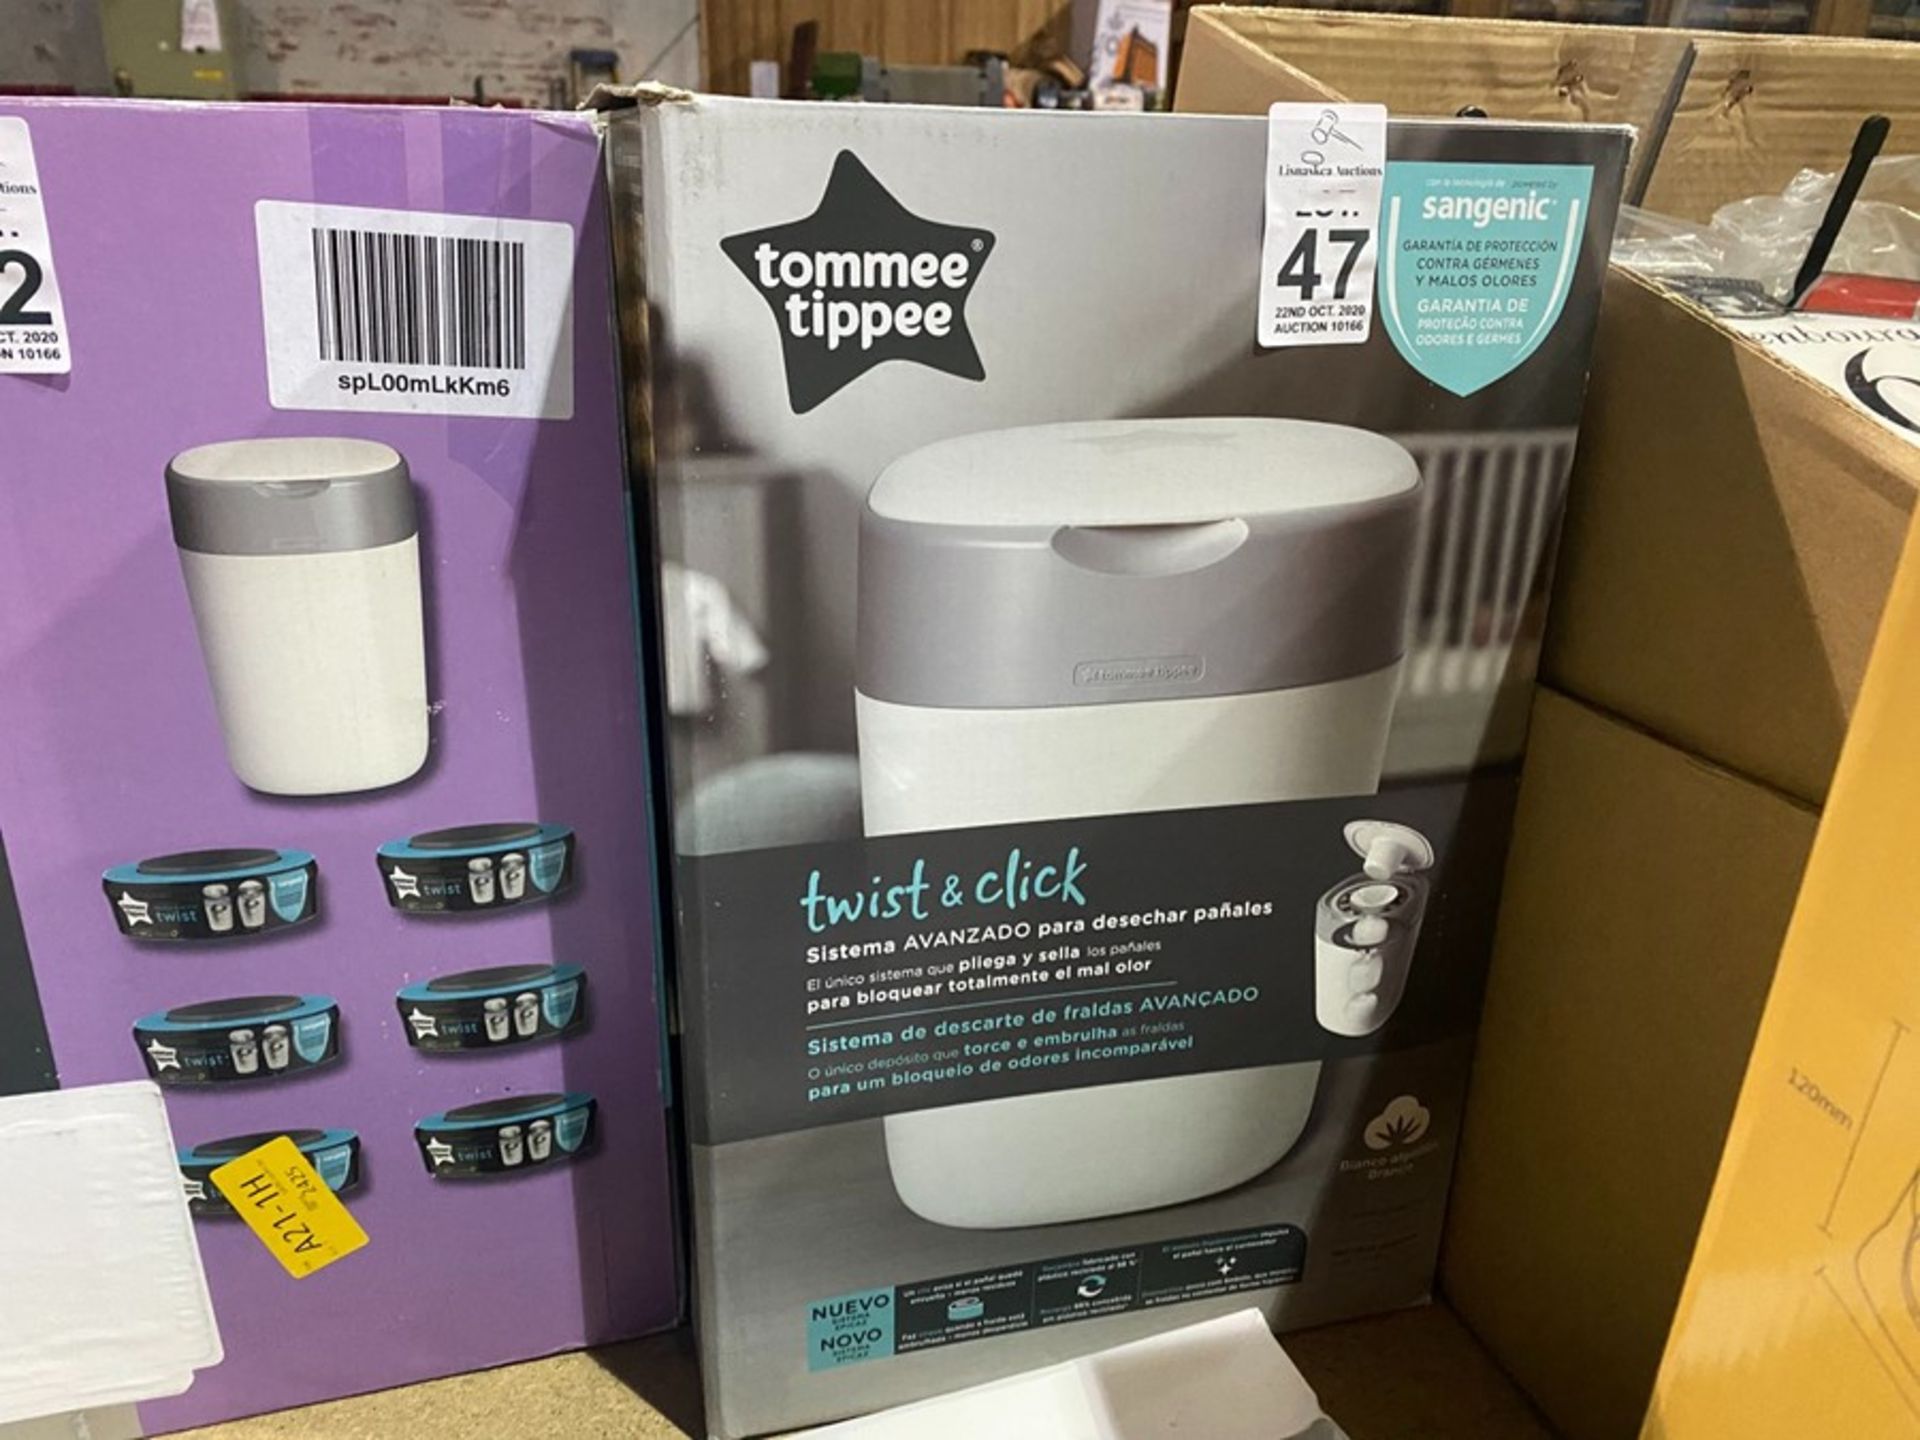 TOMMEE TIPPEE TWIST AND CLICK NAPPY SYSTEM